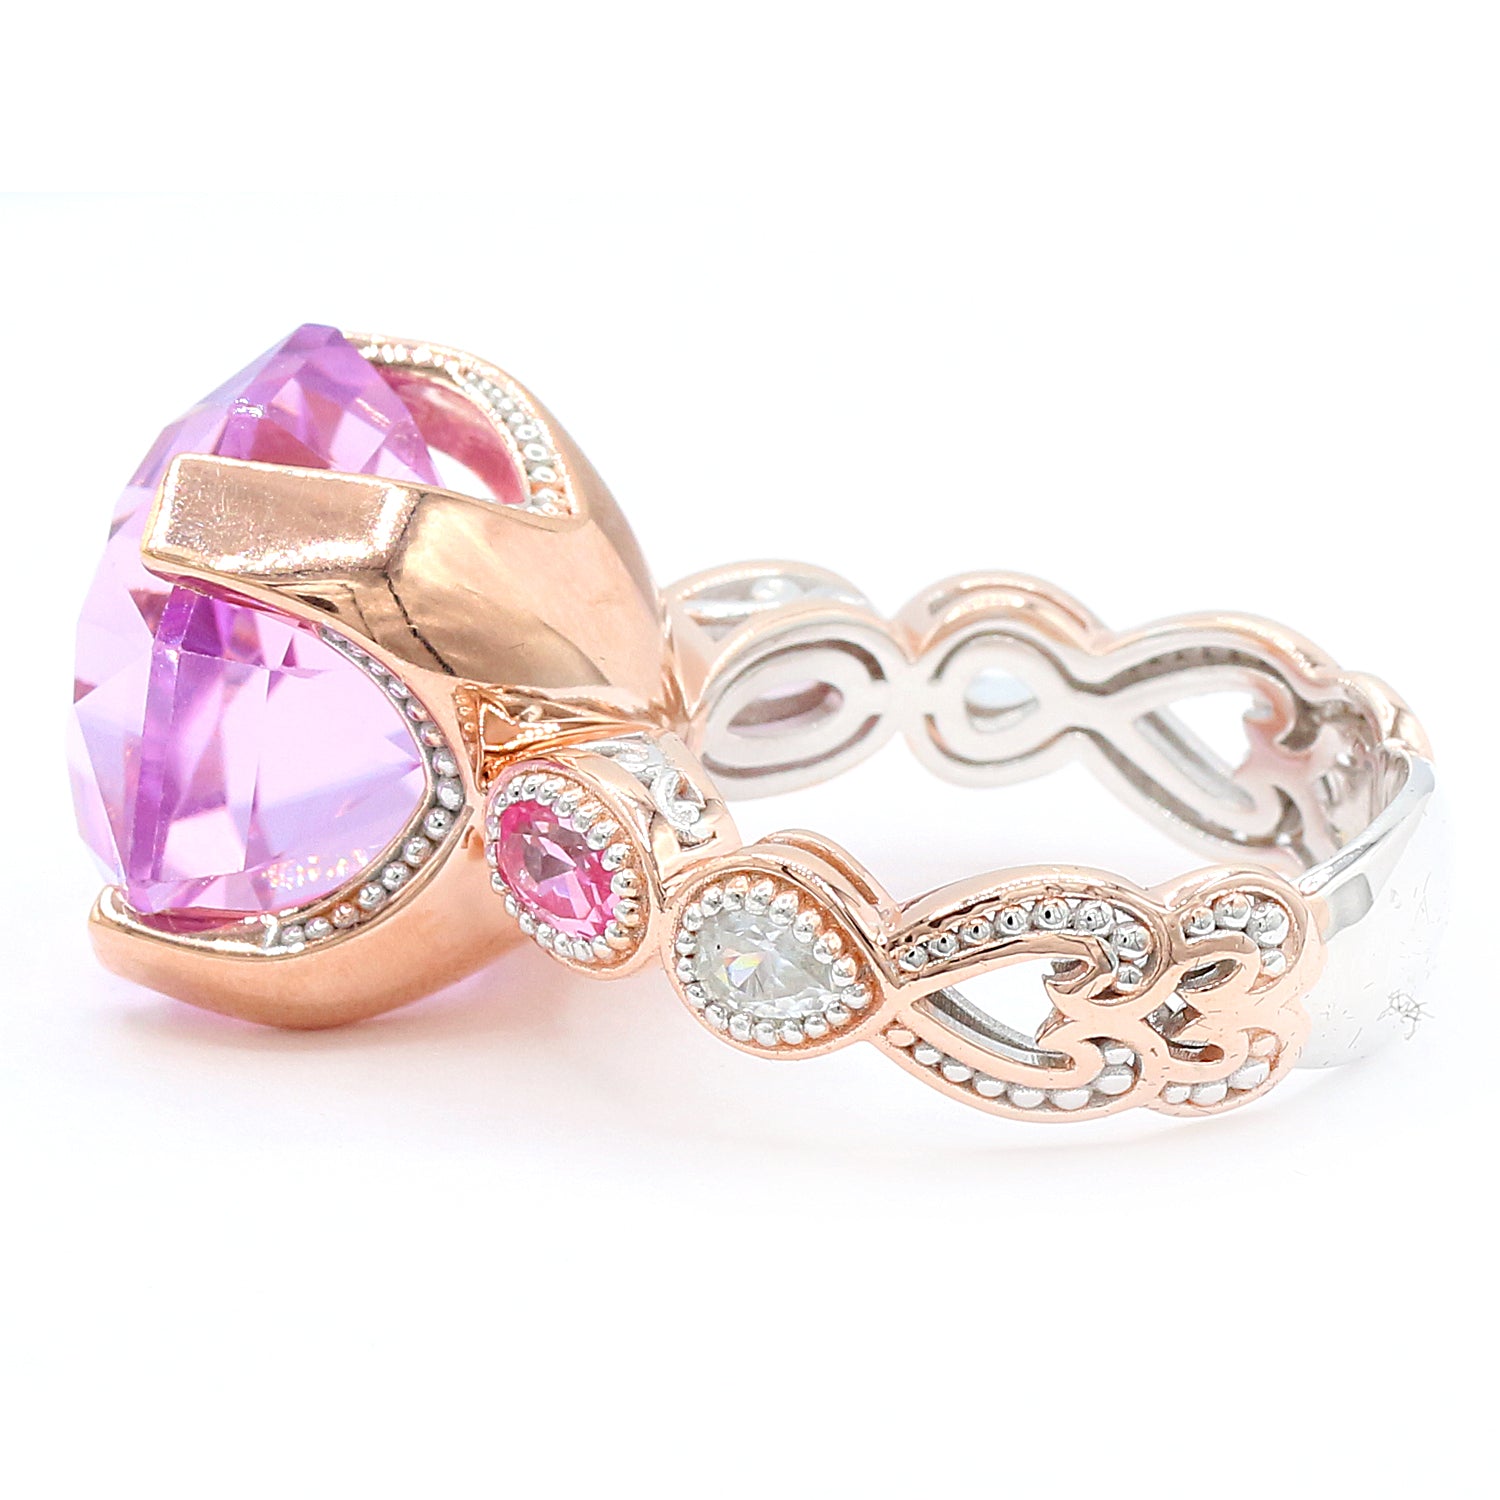 Limited Edition Gems en Vogue Luxe One-of-a-Kind 19.37ctw Kunzite, Tanzanian Pink Spinel & White Zircon Ring